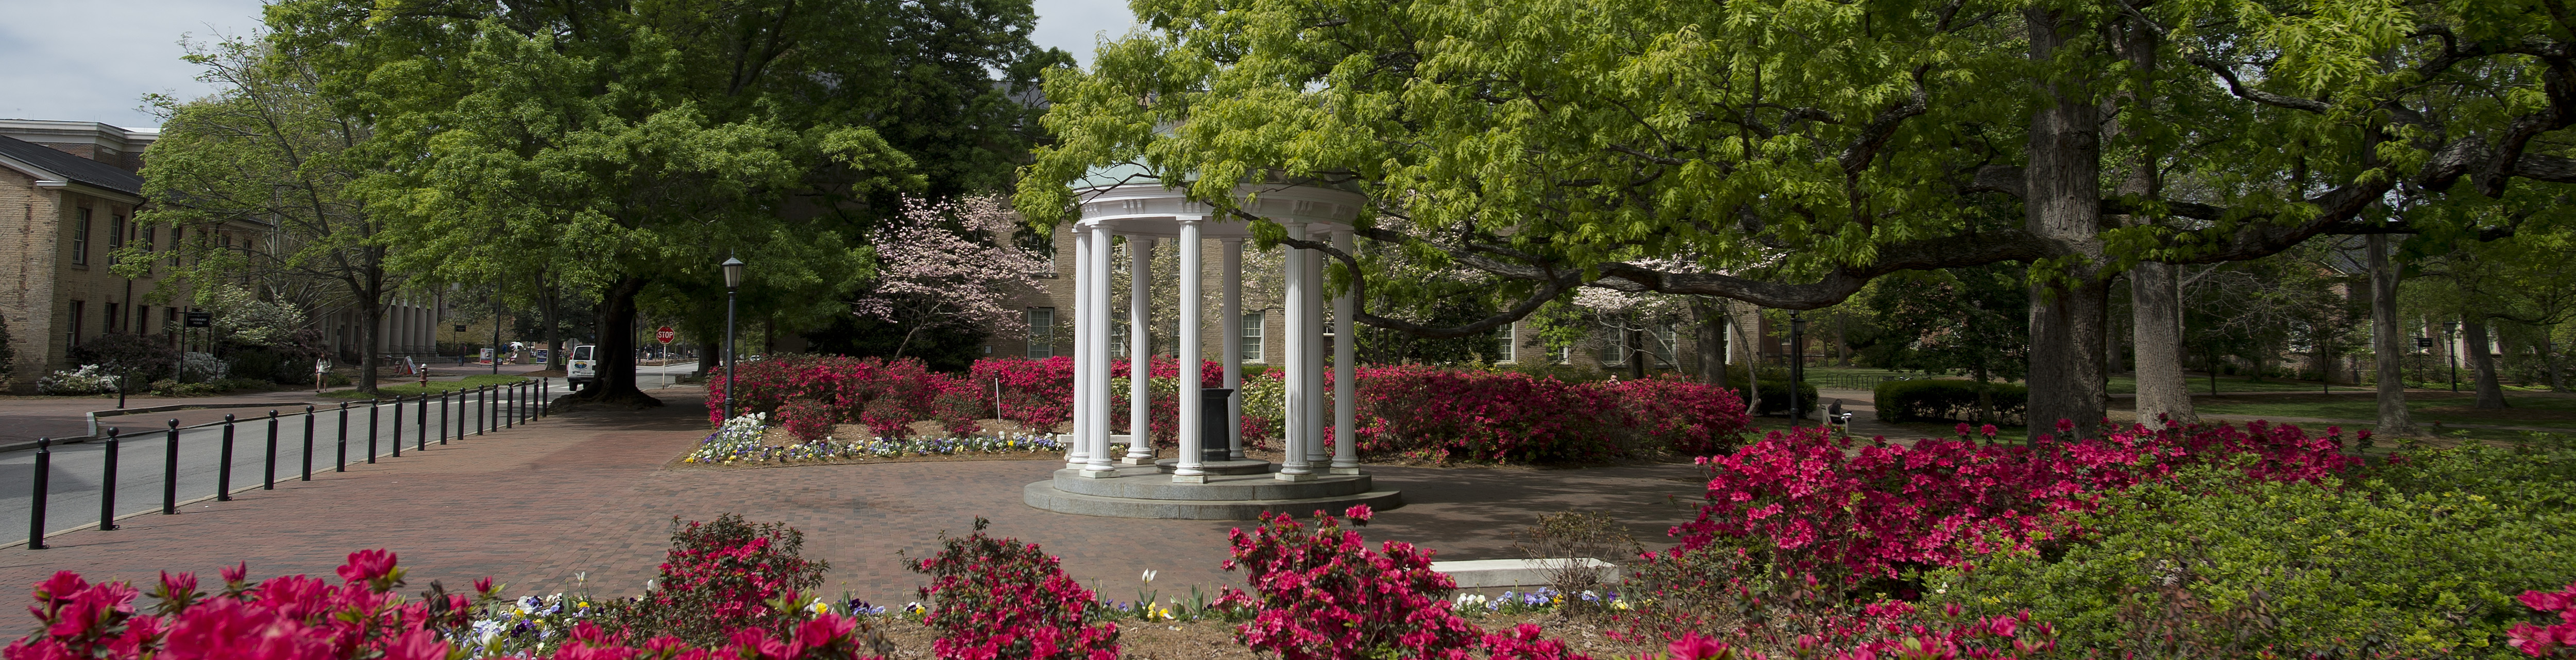 Colorful blossoms surrounding UNC Old Well